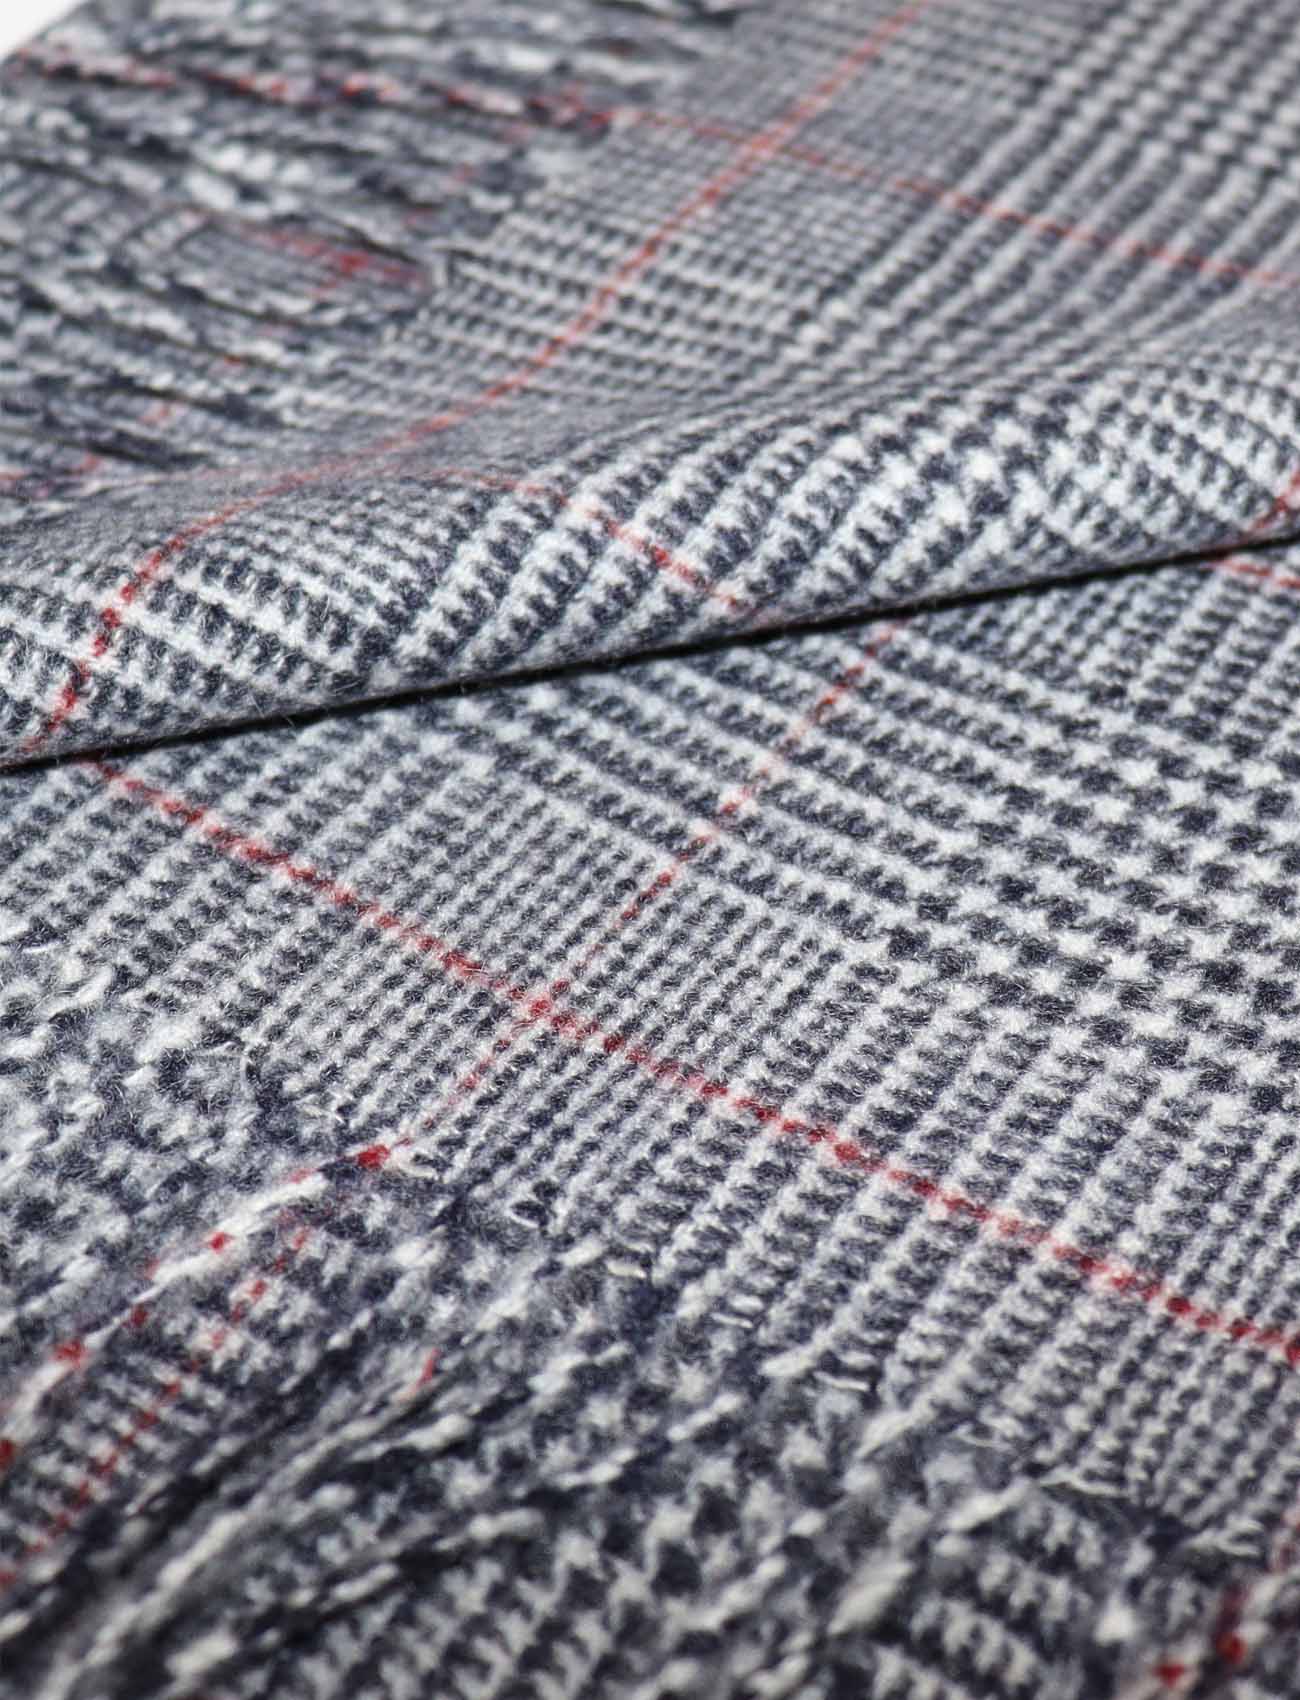 Plaid Cashmere Scarf in grey for women and men details